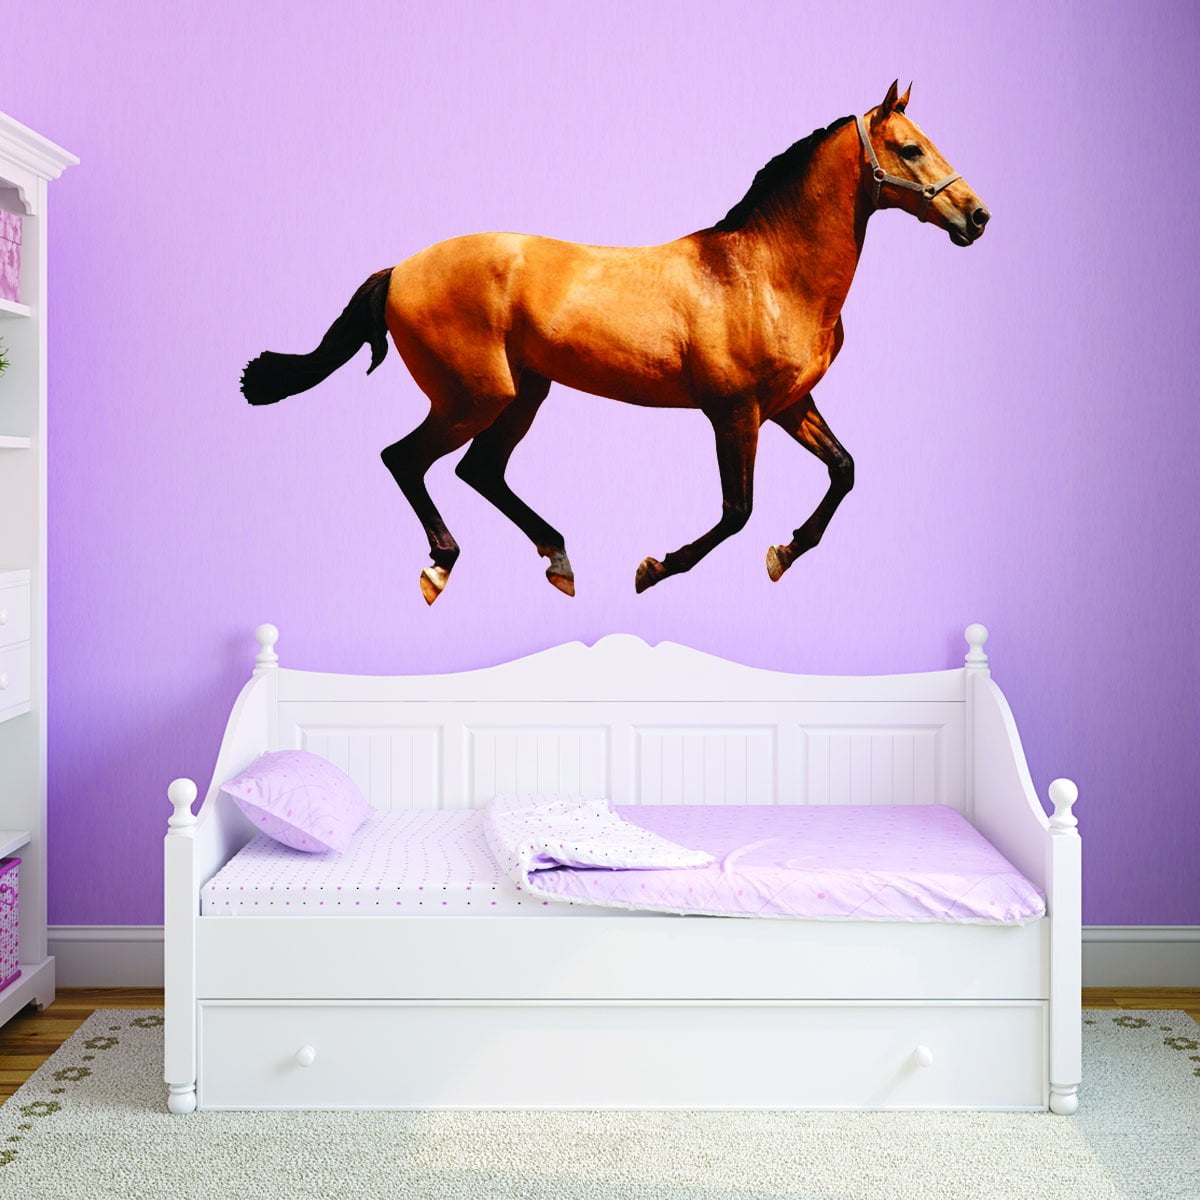 Personalised Horse Cartoon Wall Sticker Girls Bedroom Decal Equine Art Pony Ride 